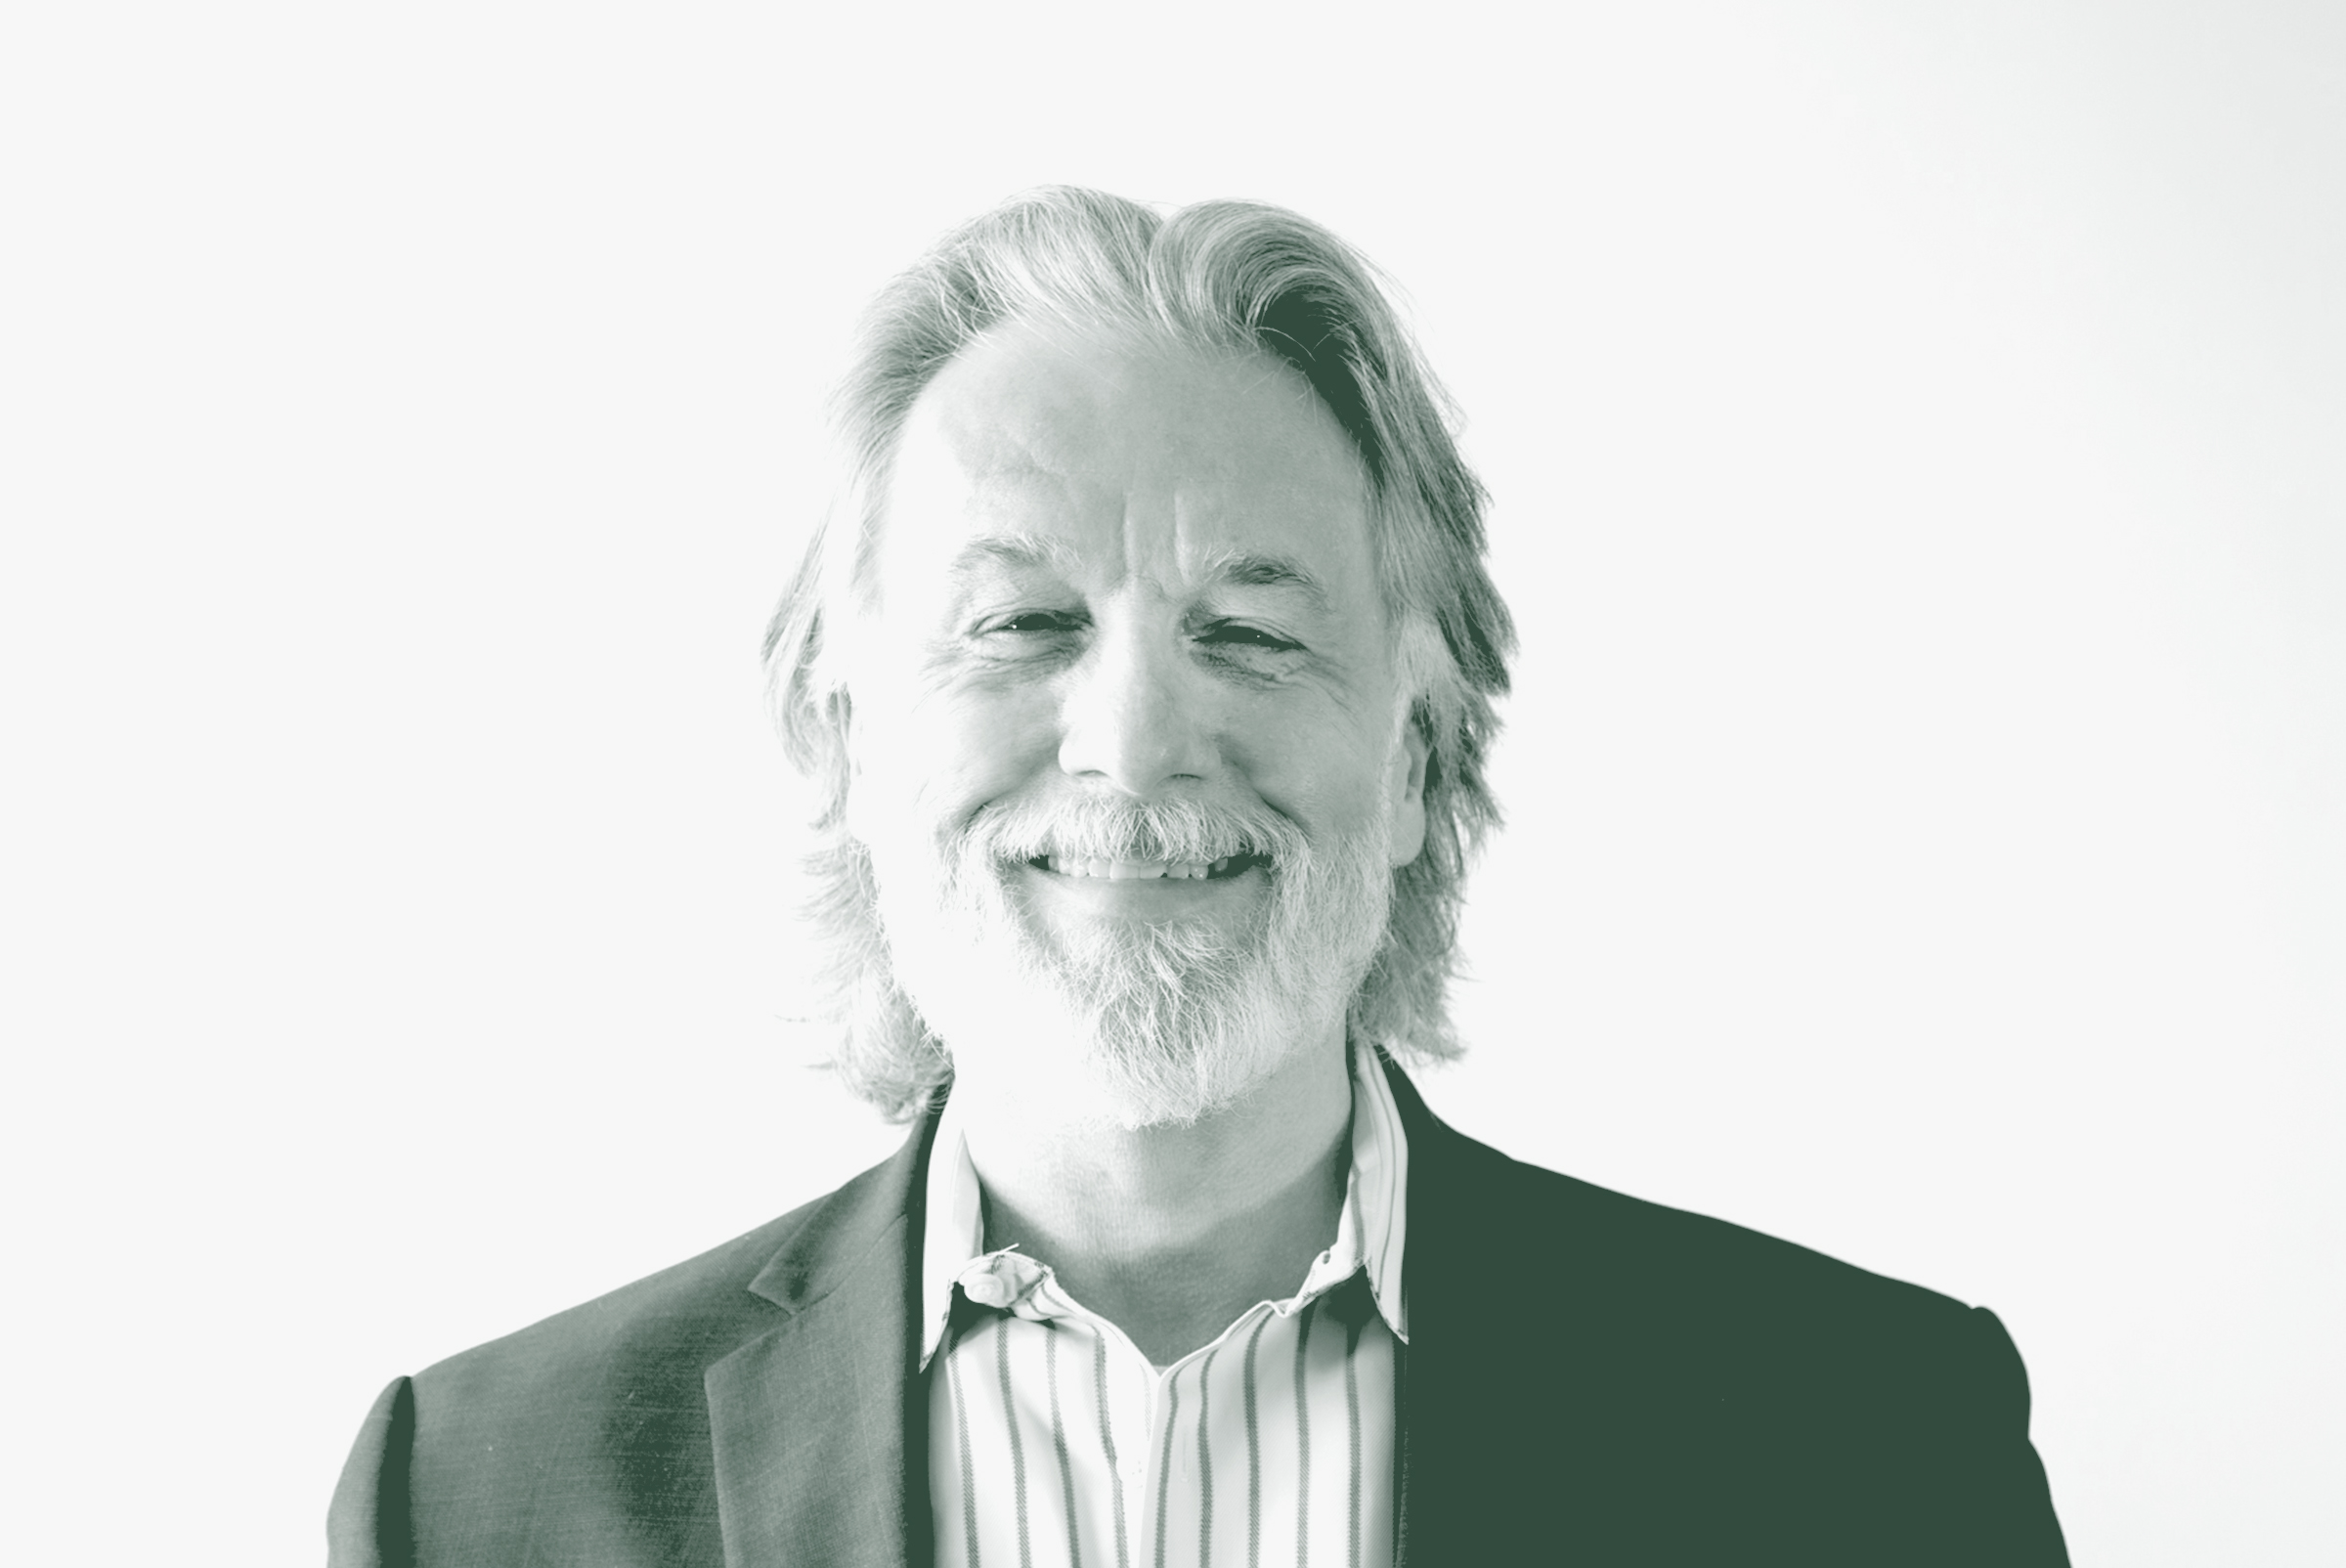 A black and white portrait of Brian Kuper, the Design Principal with GFF, in front of a white background.